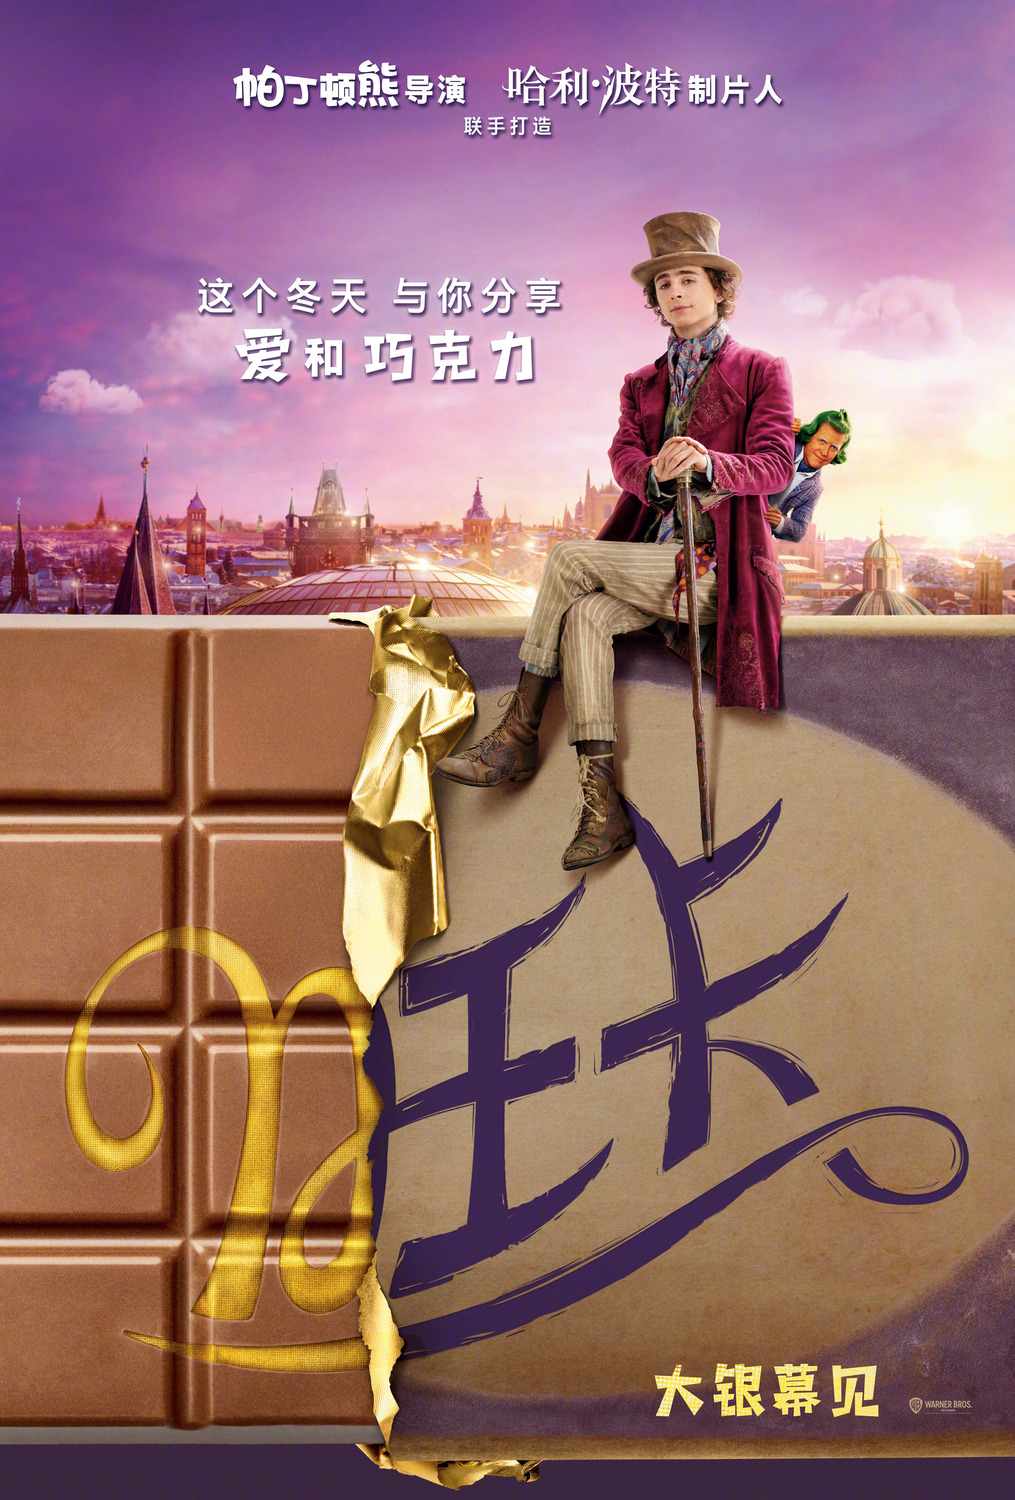 Extra Large Movie Poster Image for Wonka (#19 of 22)